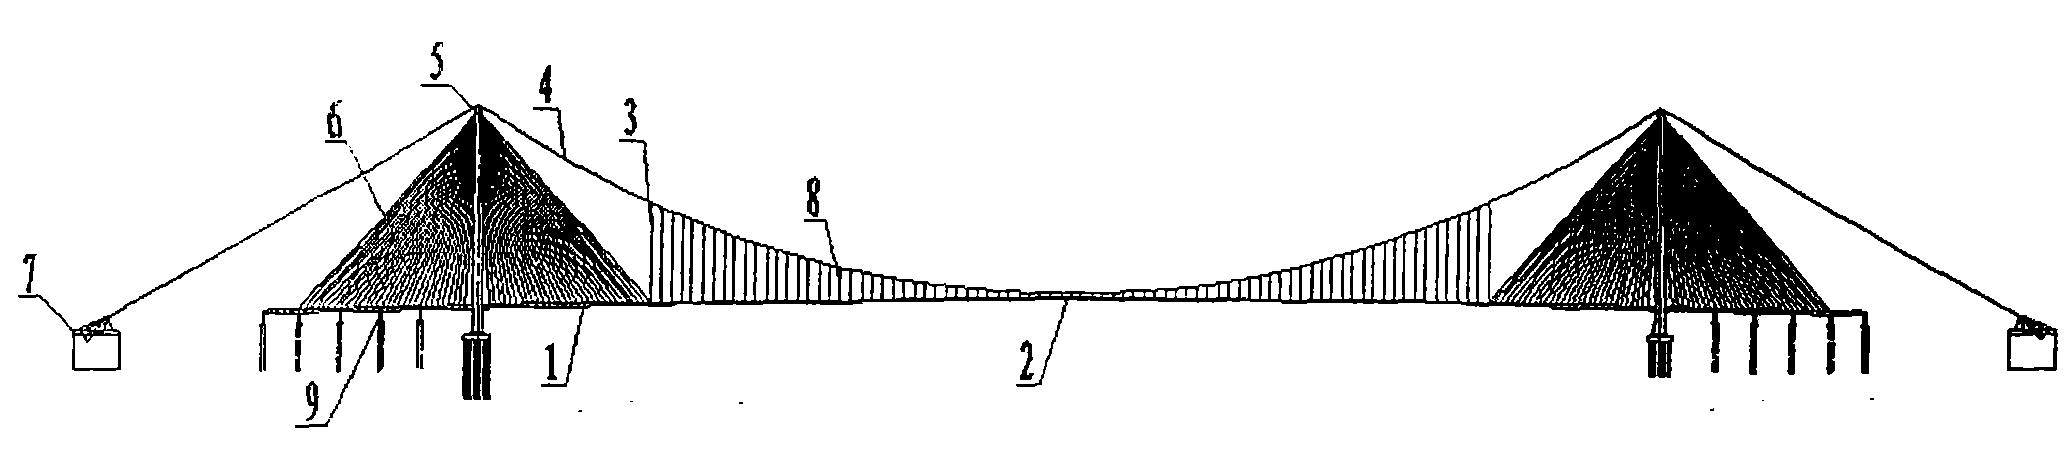 Suspended and cable-stayed combined structural bridge